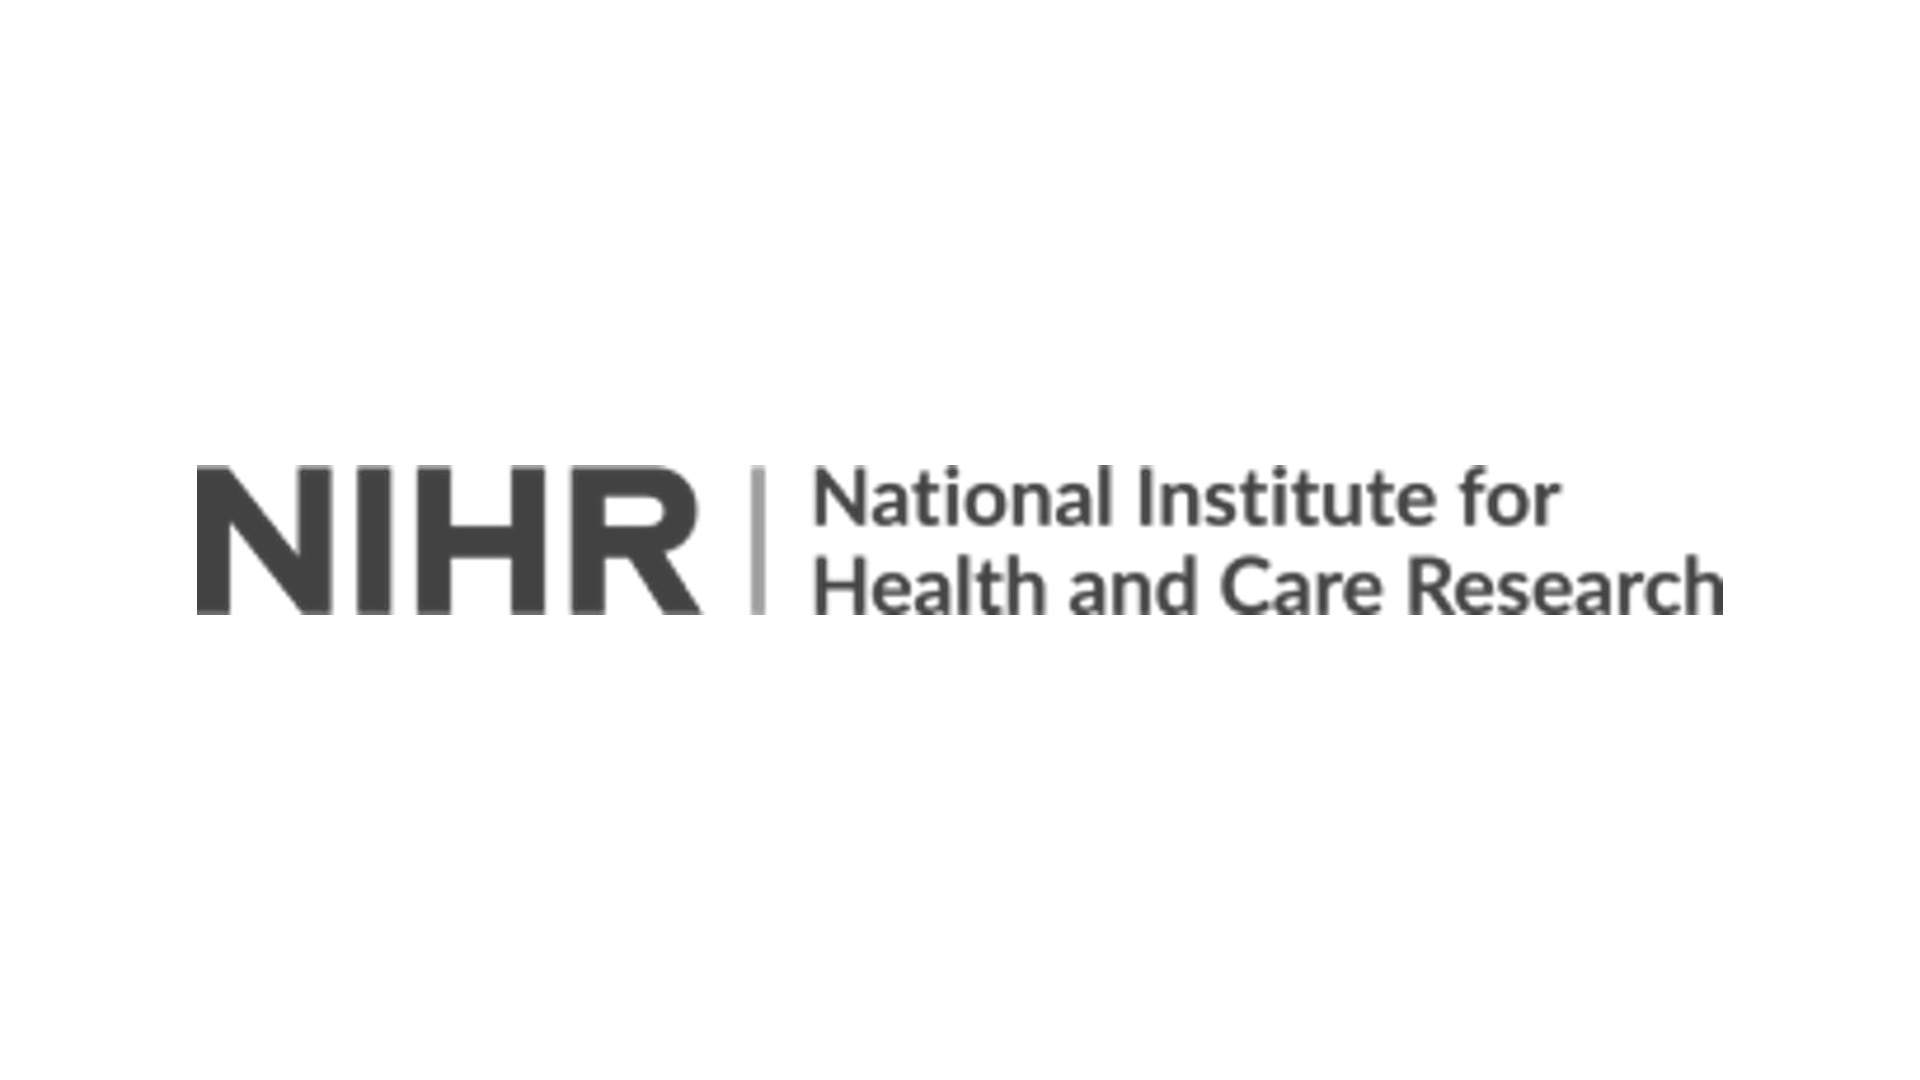 National Institute for Health and care research